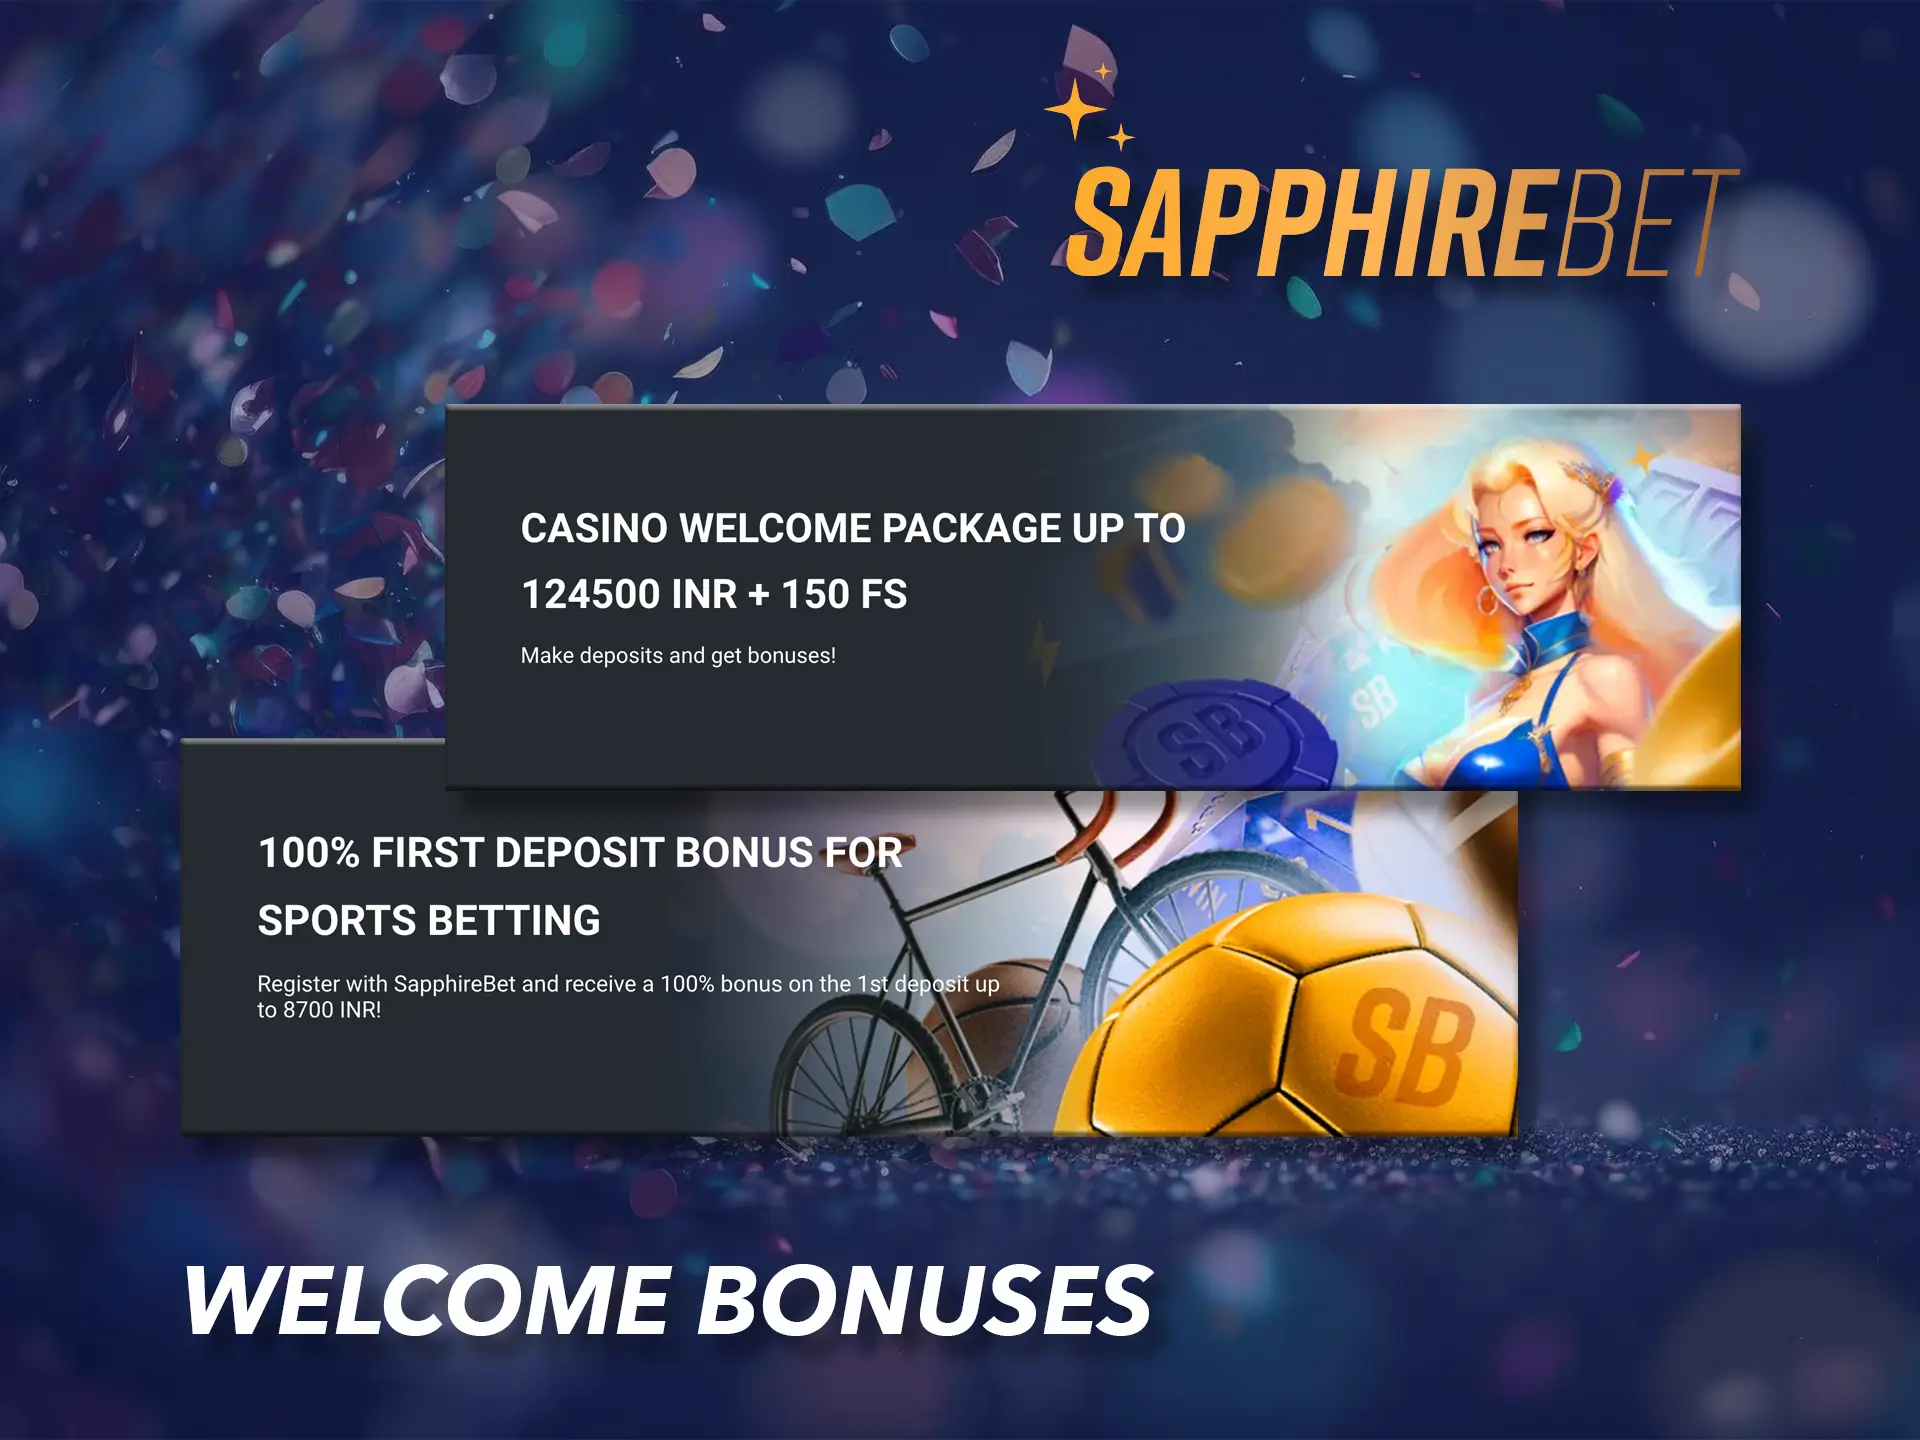 Check out the welcome bonuses at Sapphirebet Casino.